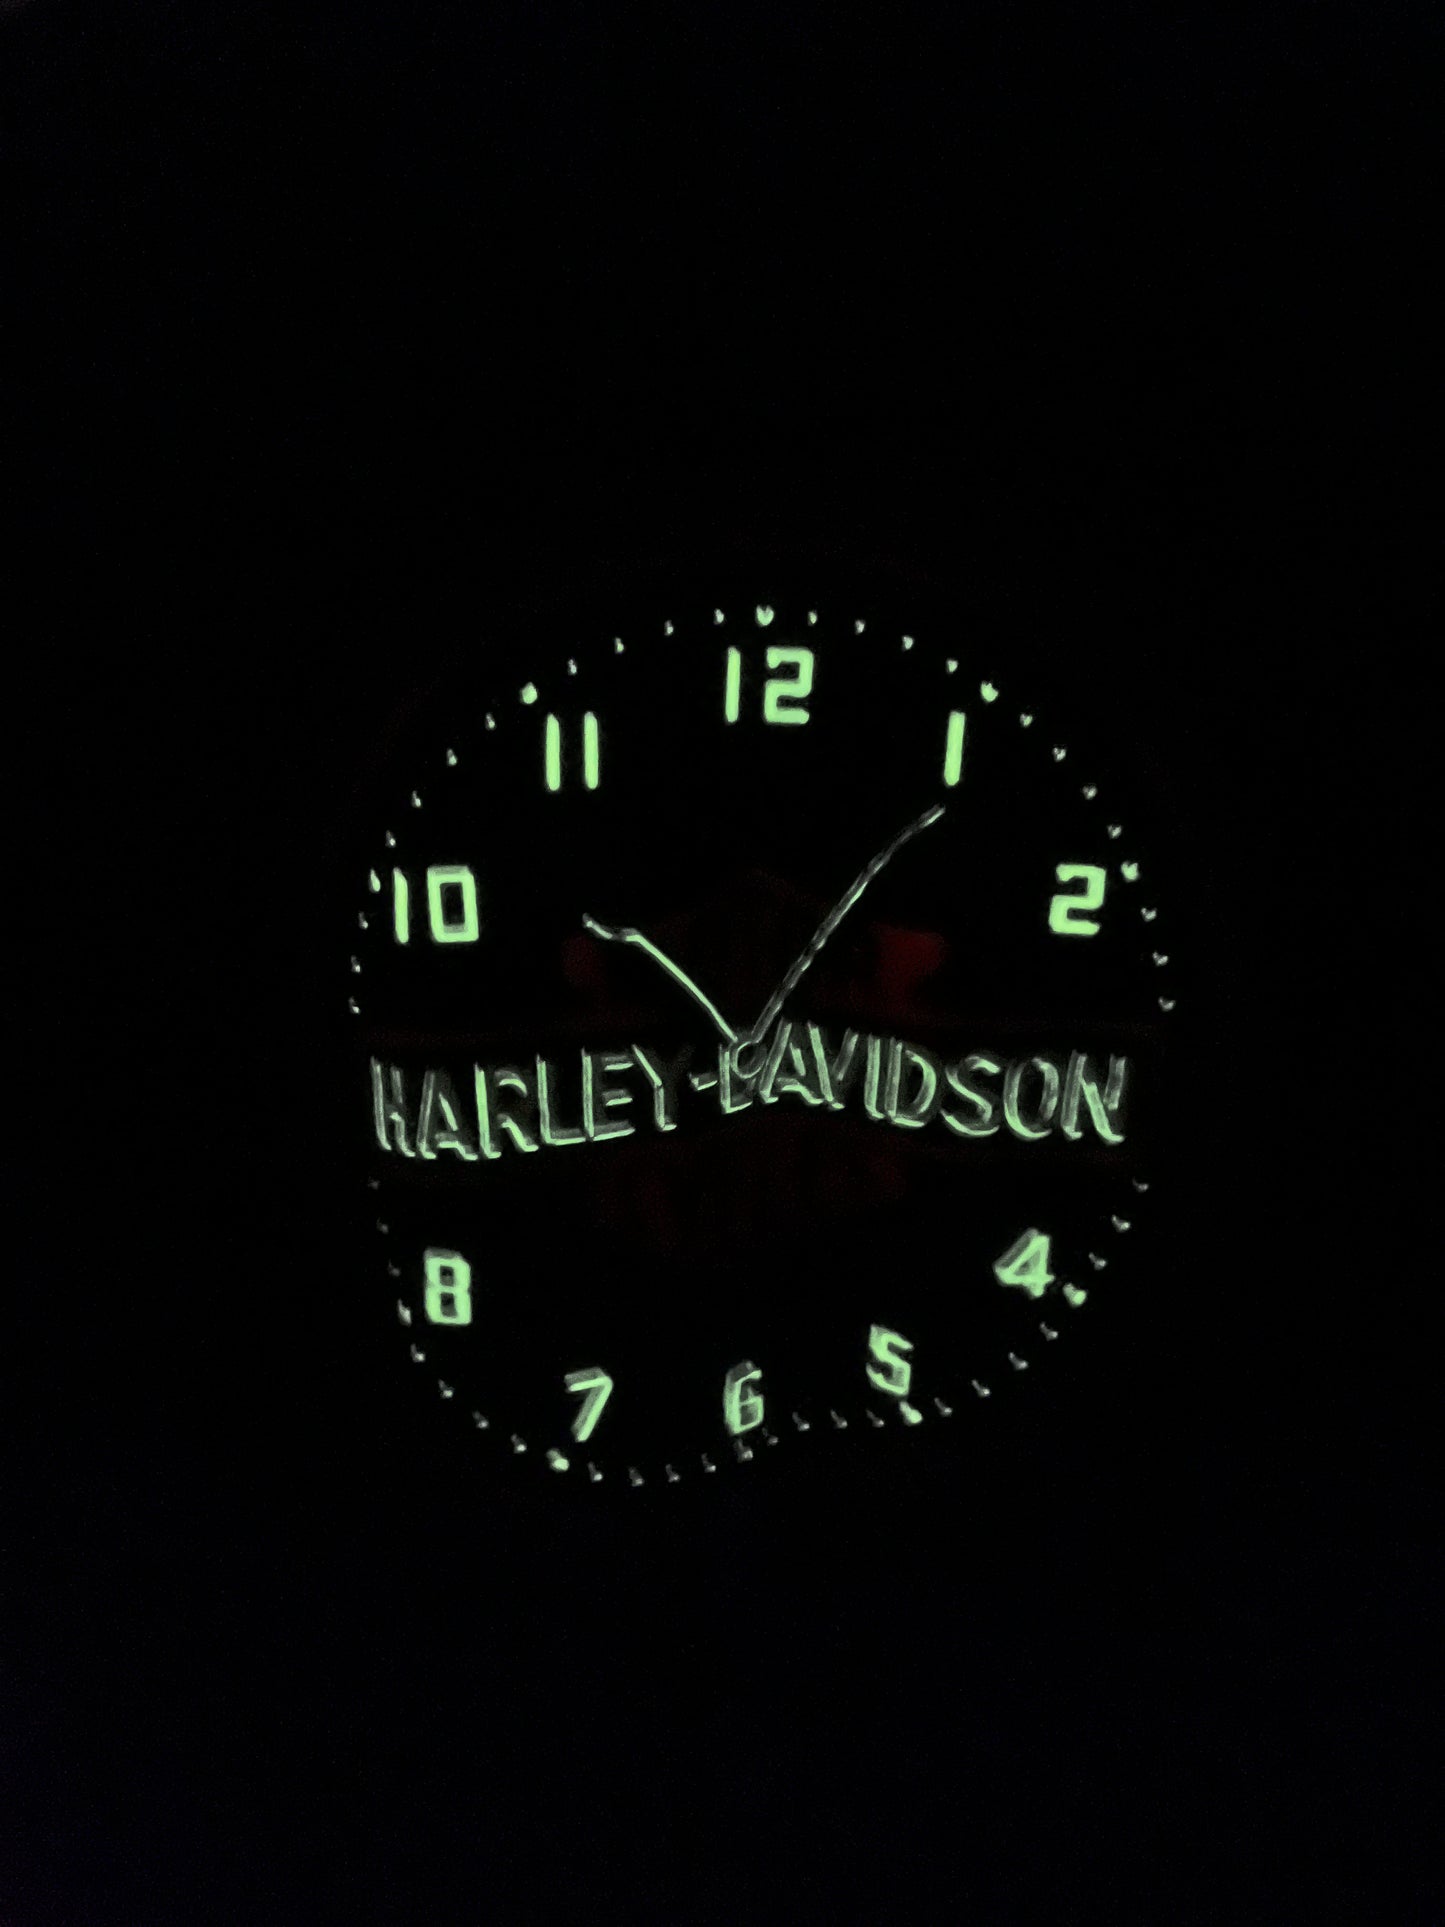 Harley Davidson Time tested watch glow in the dark graphic / Las Vegas back graphic '94